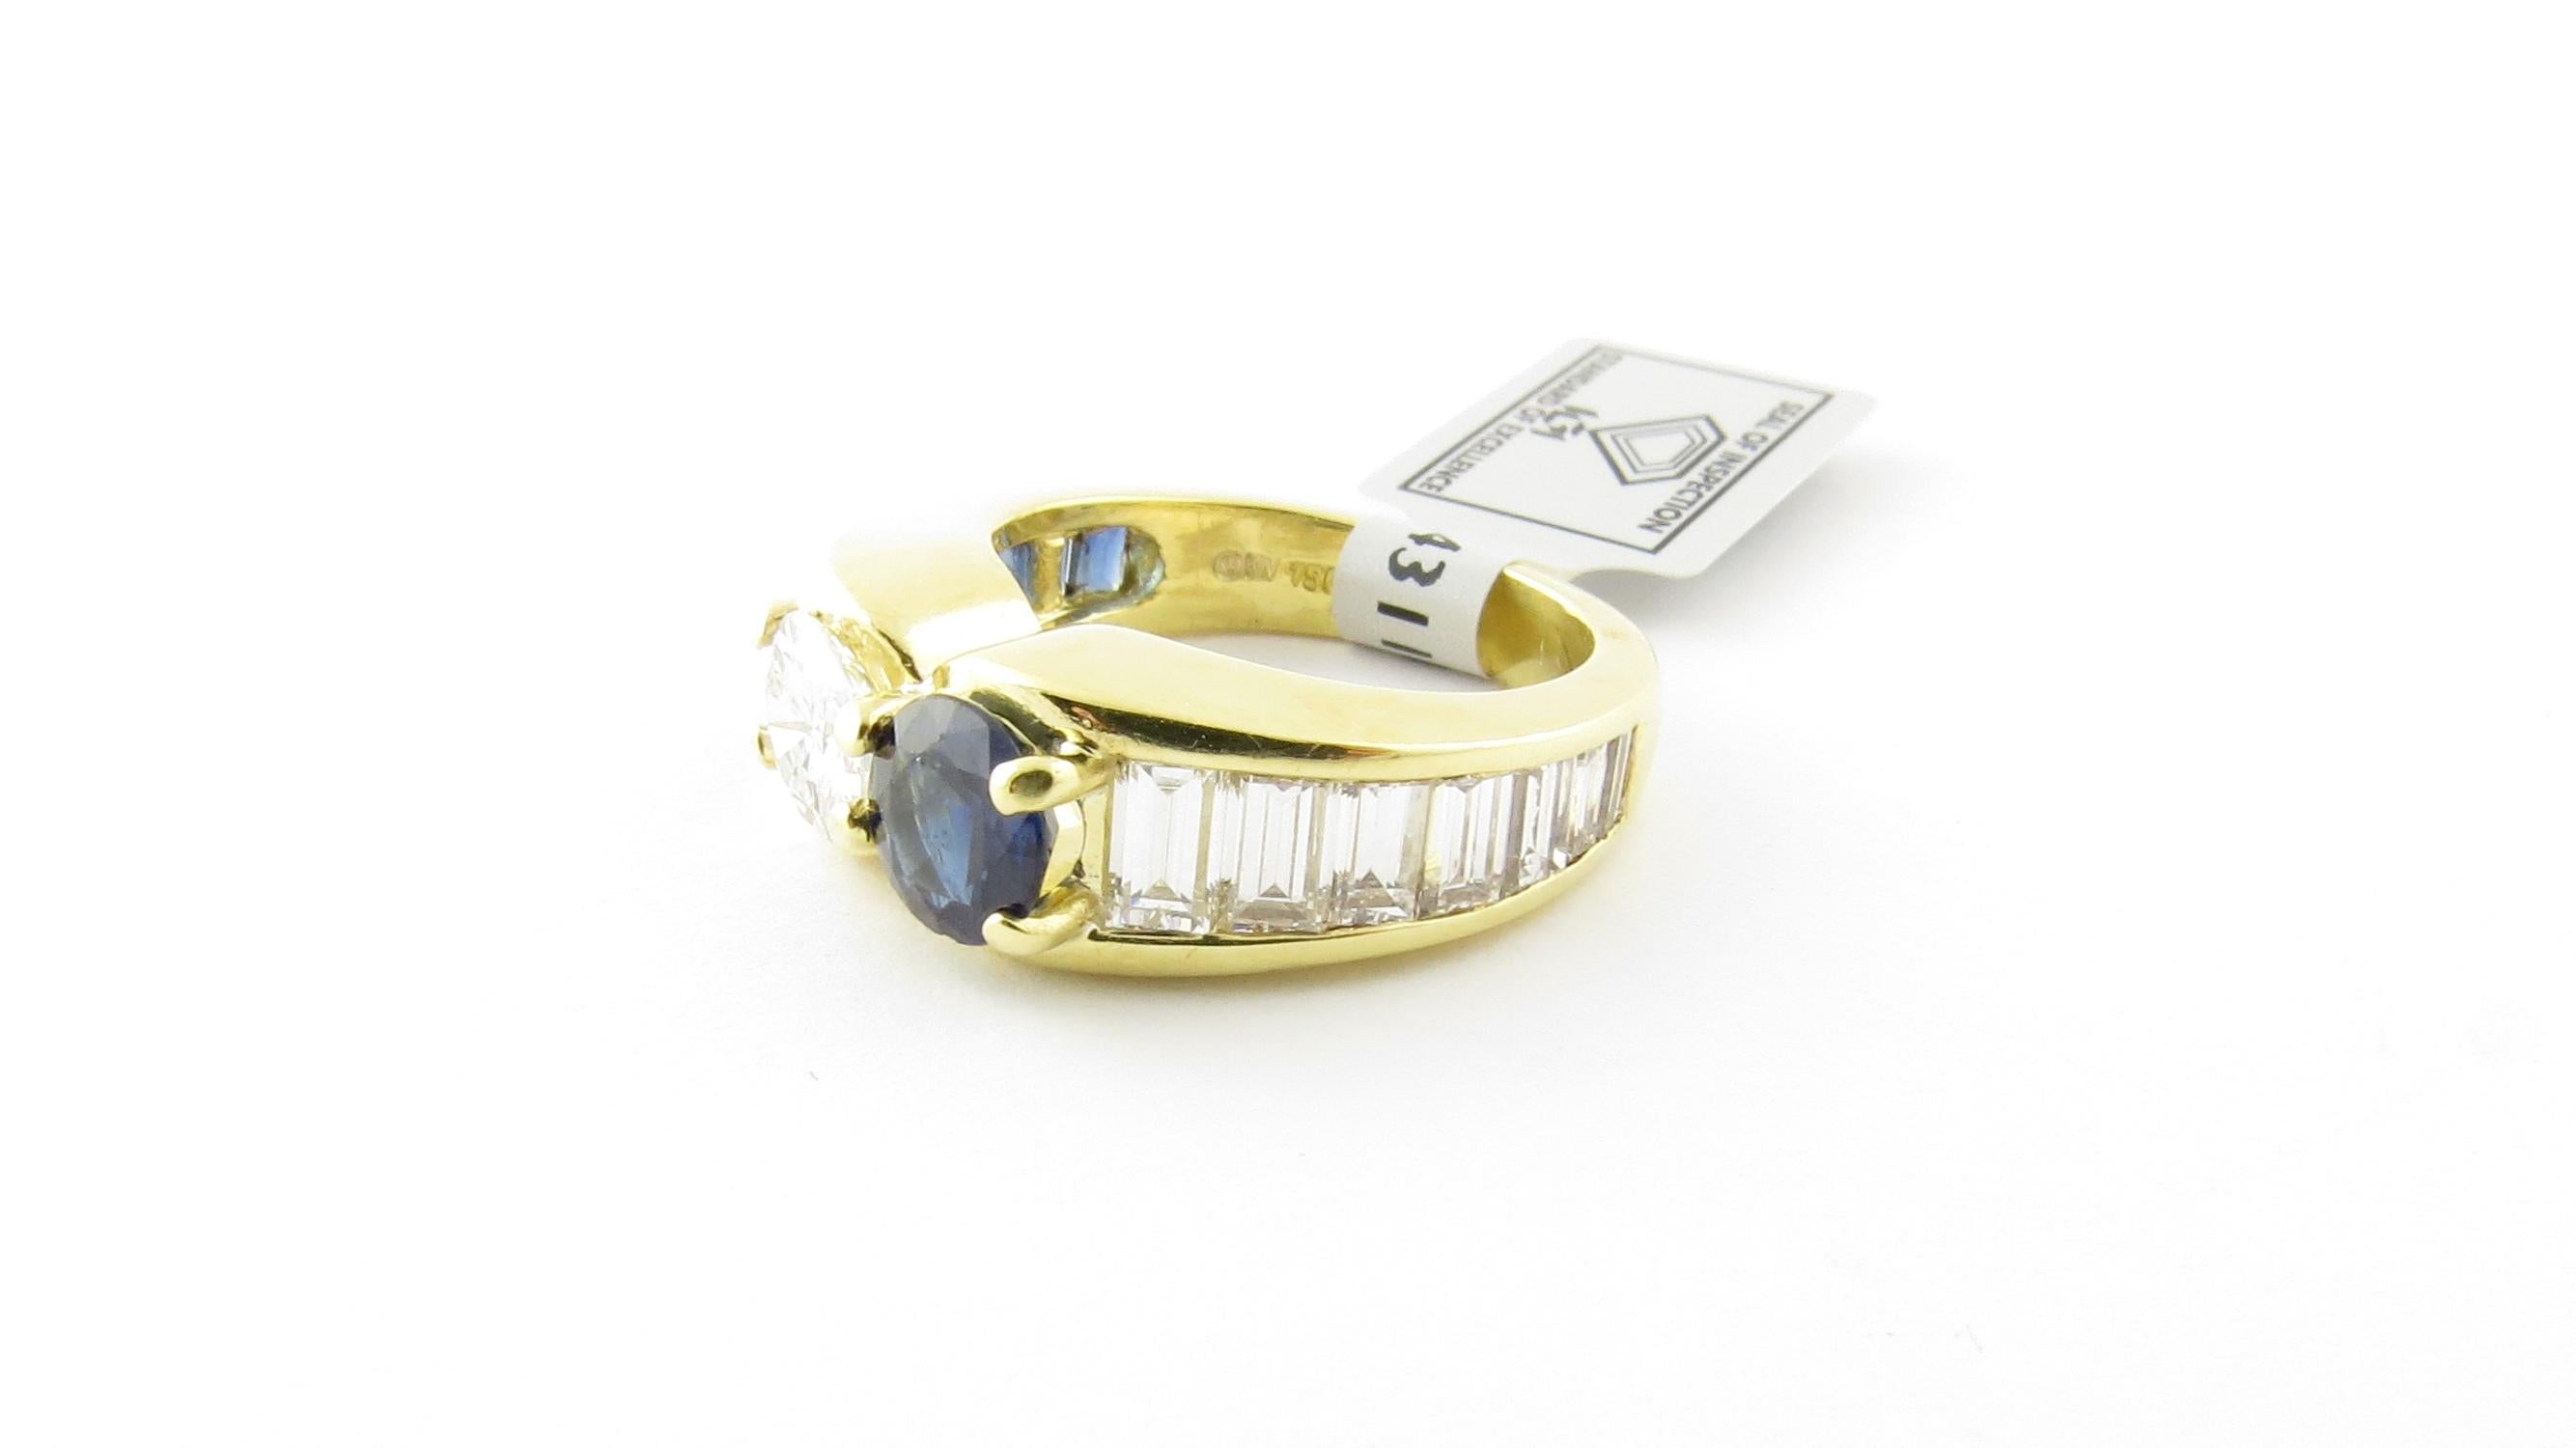 IGI Certified 18K Yellow Gold Diamond Sapphire Ring Band 

This stunning ring is set with diamonds and natural sapphires

Size 4.5

One round brilliant diamond at .55 carats SI clarity, F-G color
Seven straight baguette cut diamonds at .10 carats